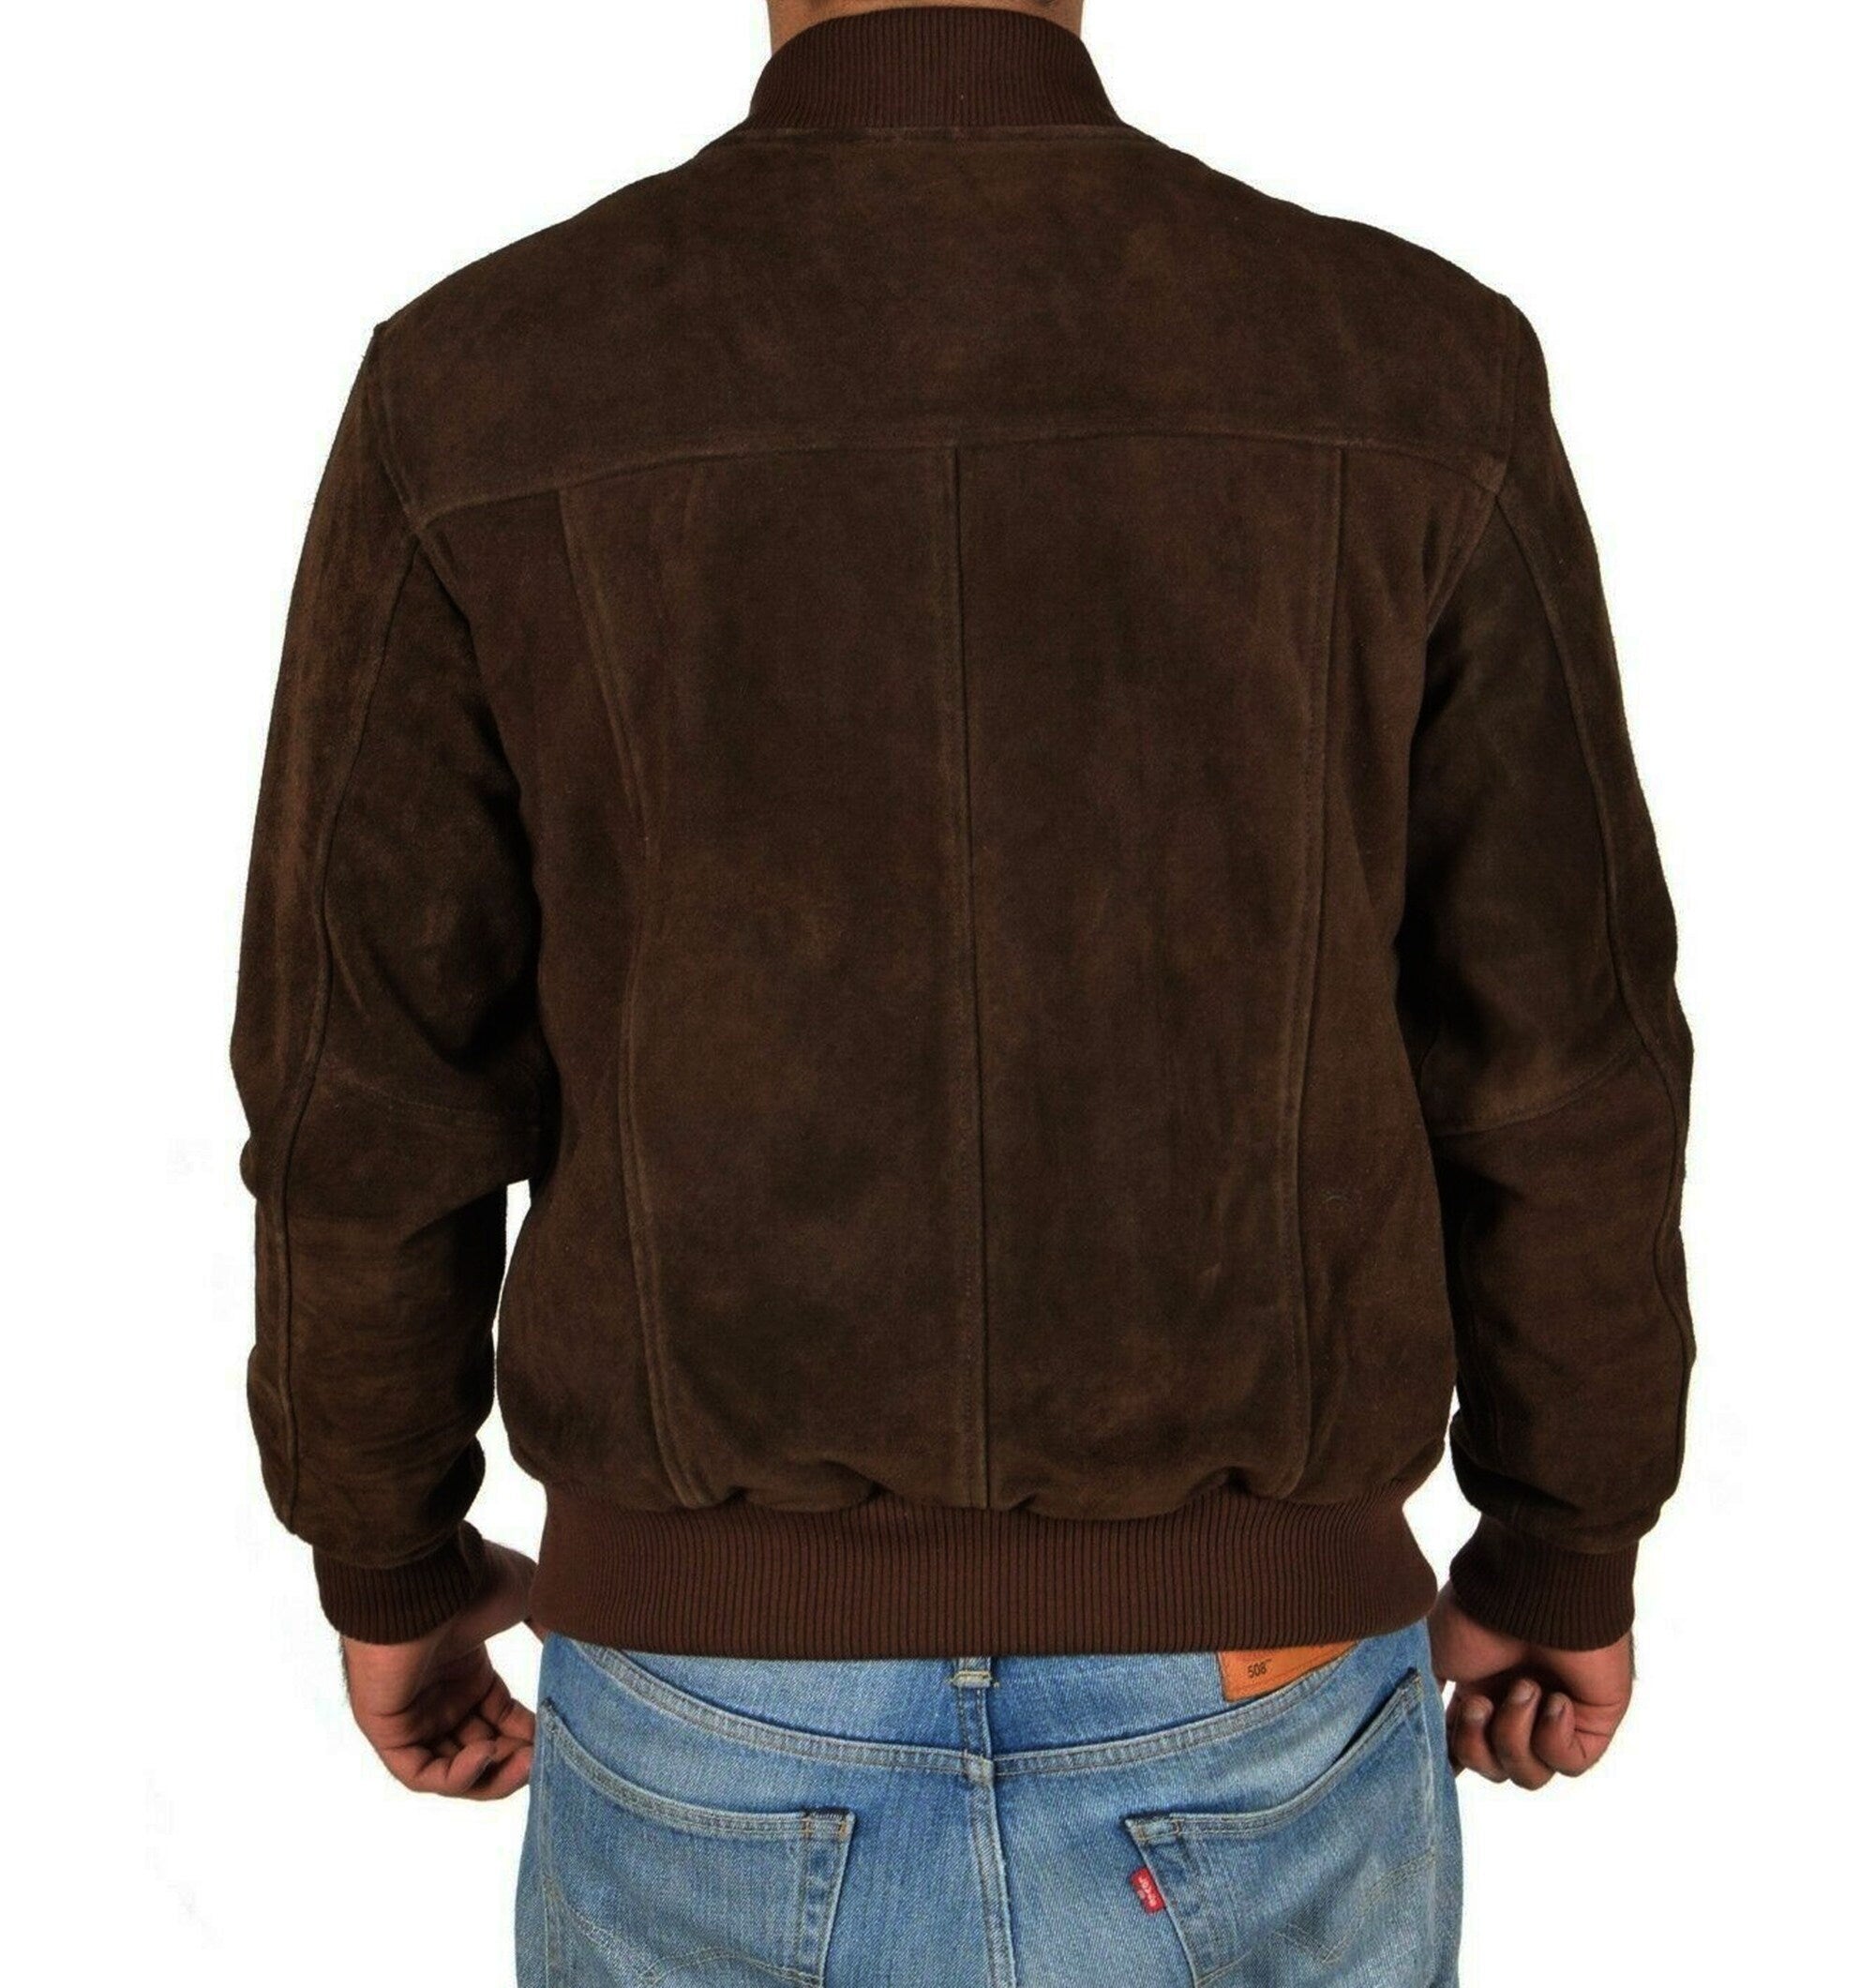 Men Suede Leather Handmade Casual Jacket